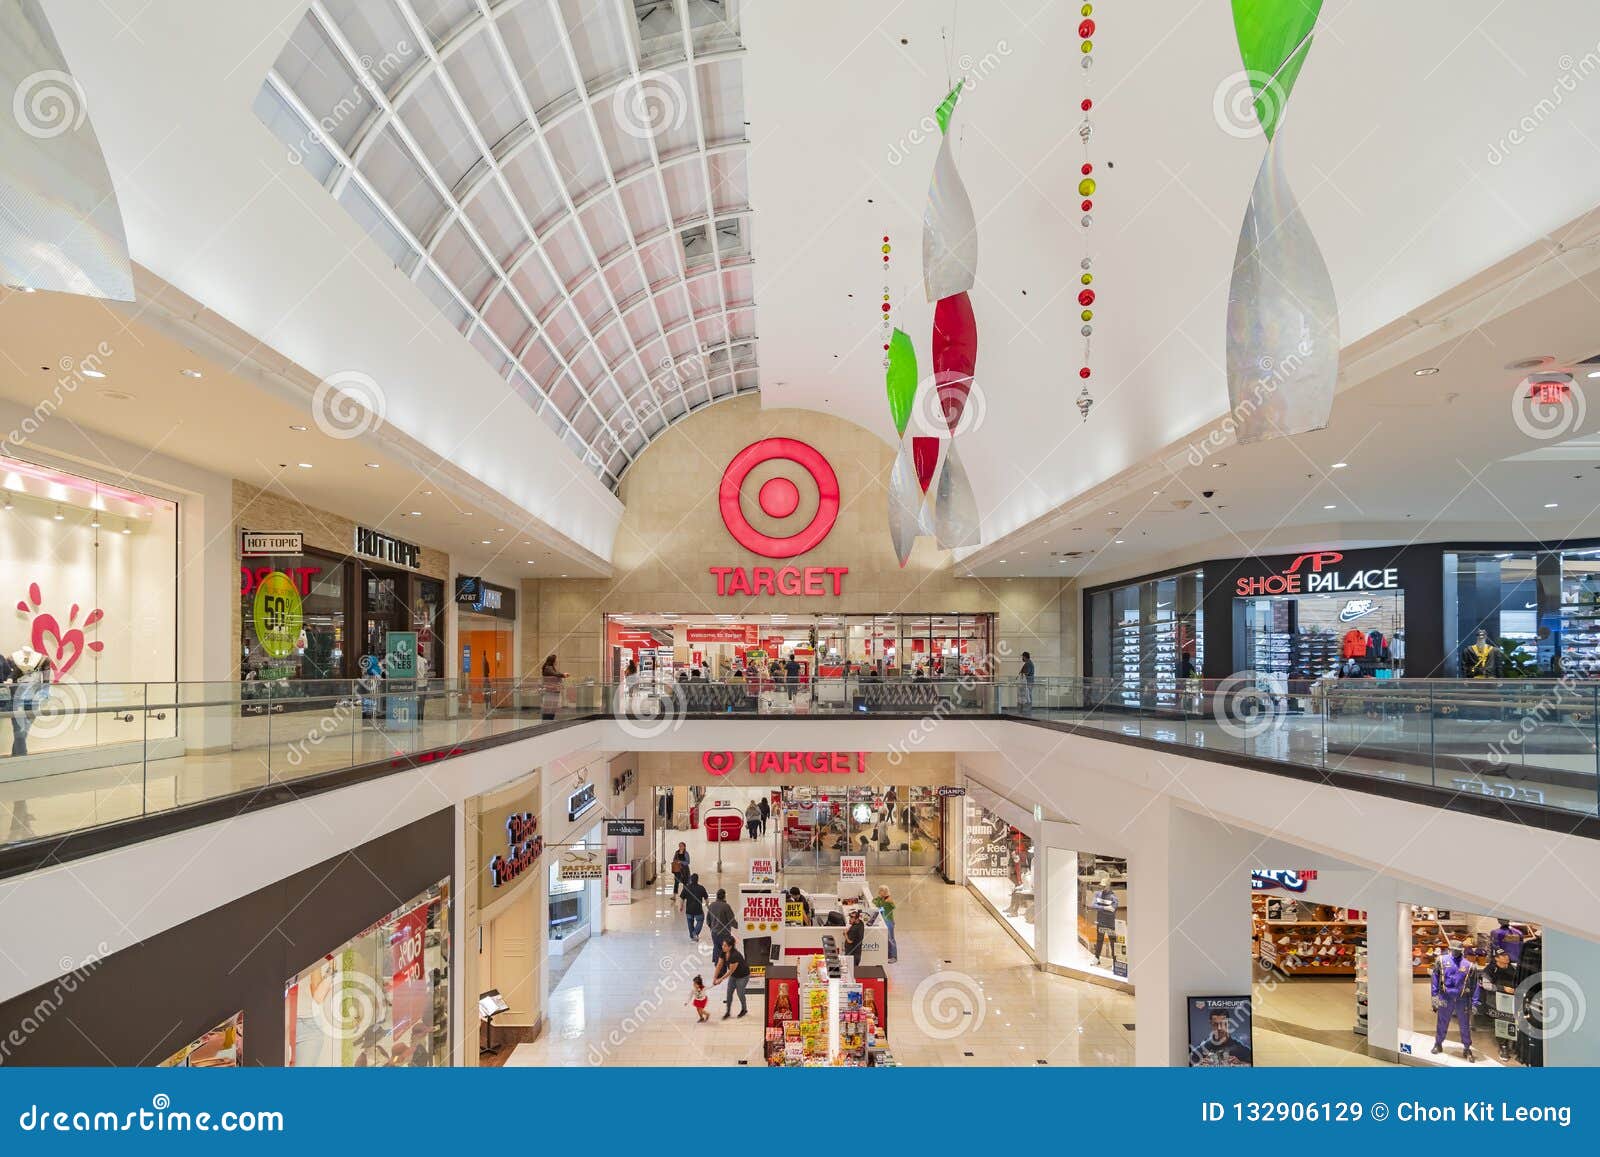 The Famous Target Grocery Store in the Glendale Galleria Shopping